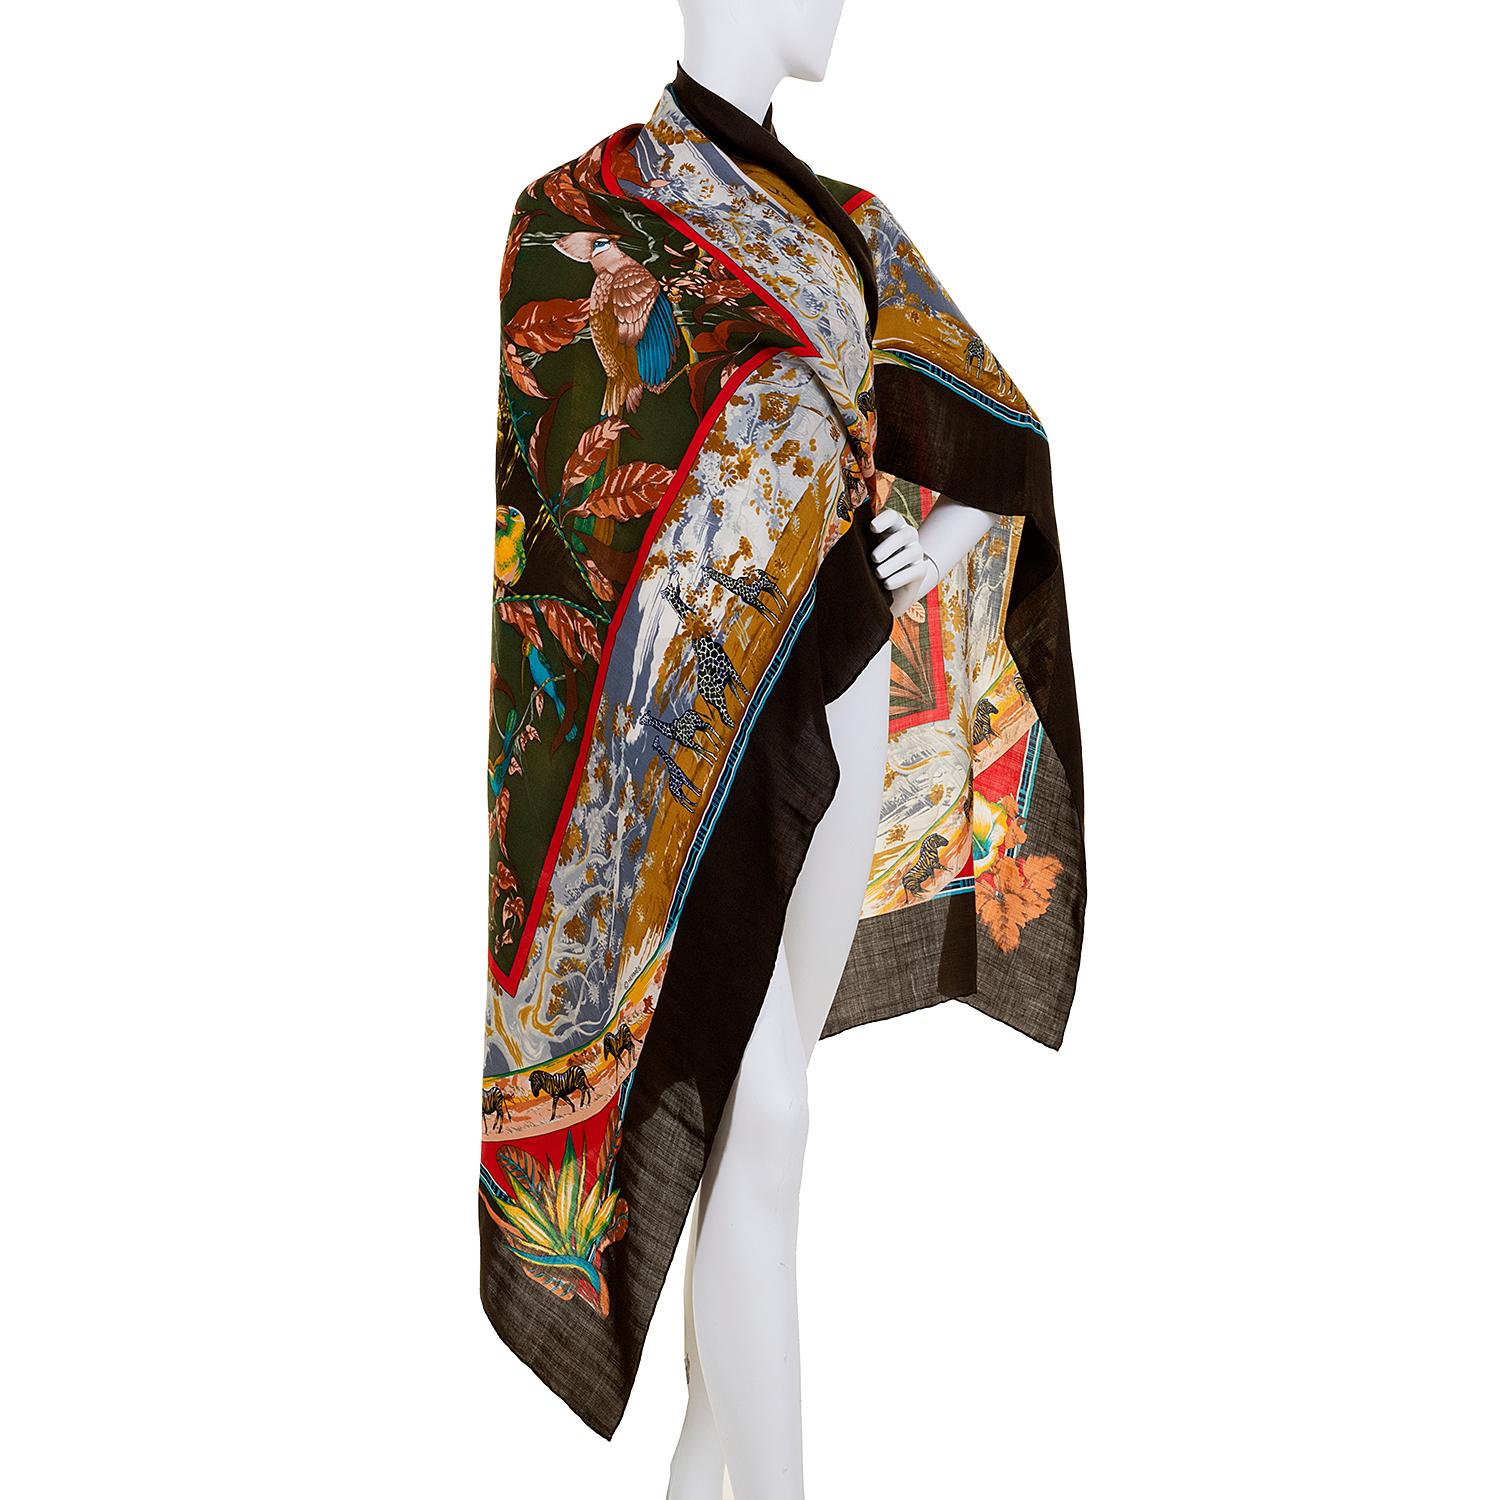 Women's Pristine Hermes Silk & Cashmere Shawl 'Tropiques' by Laurence Bourthoumieu For Sale